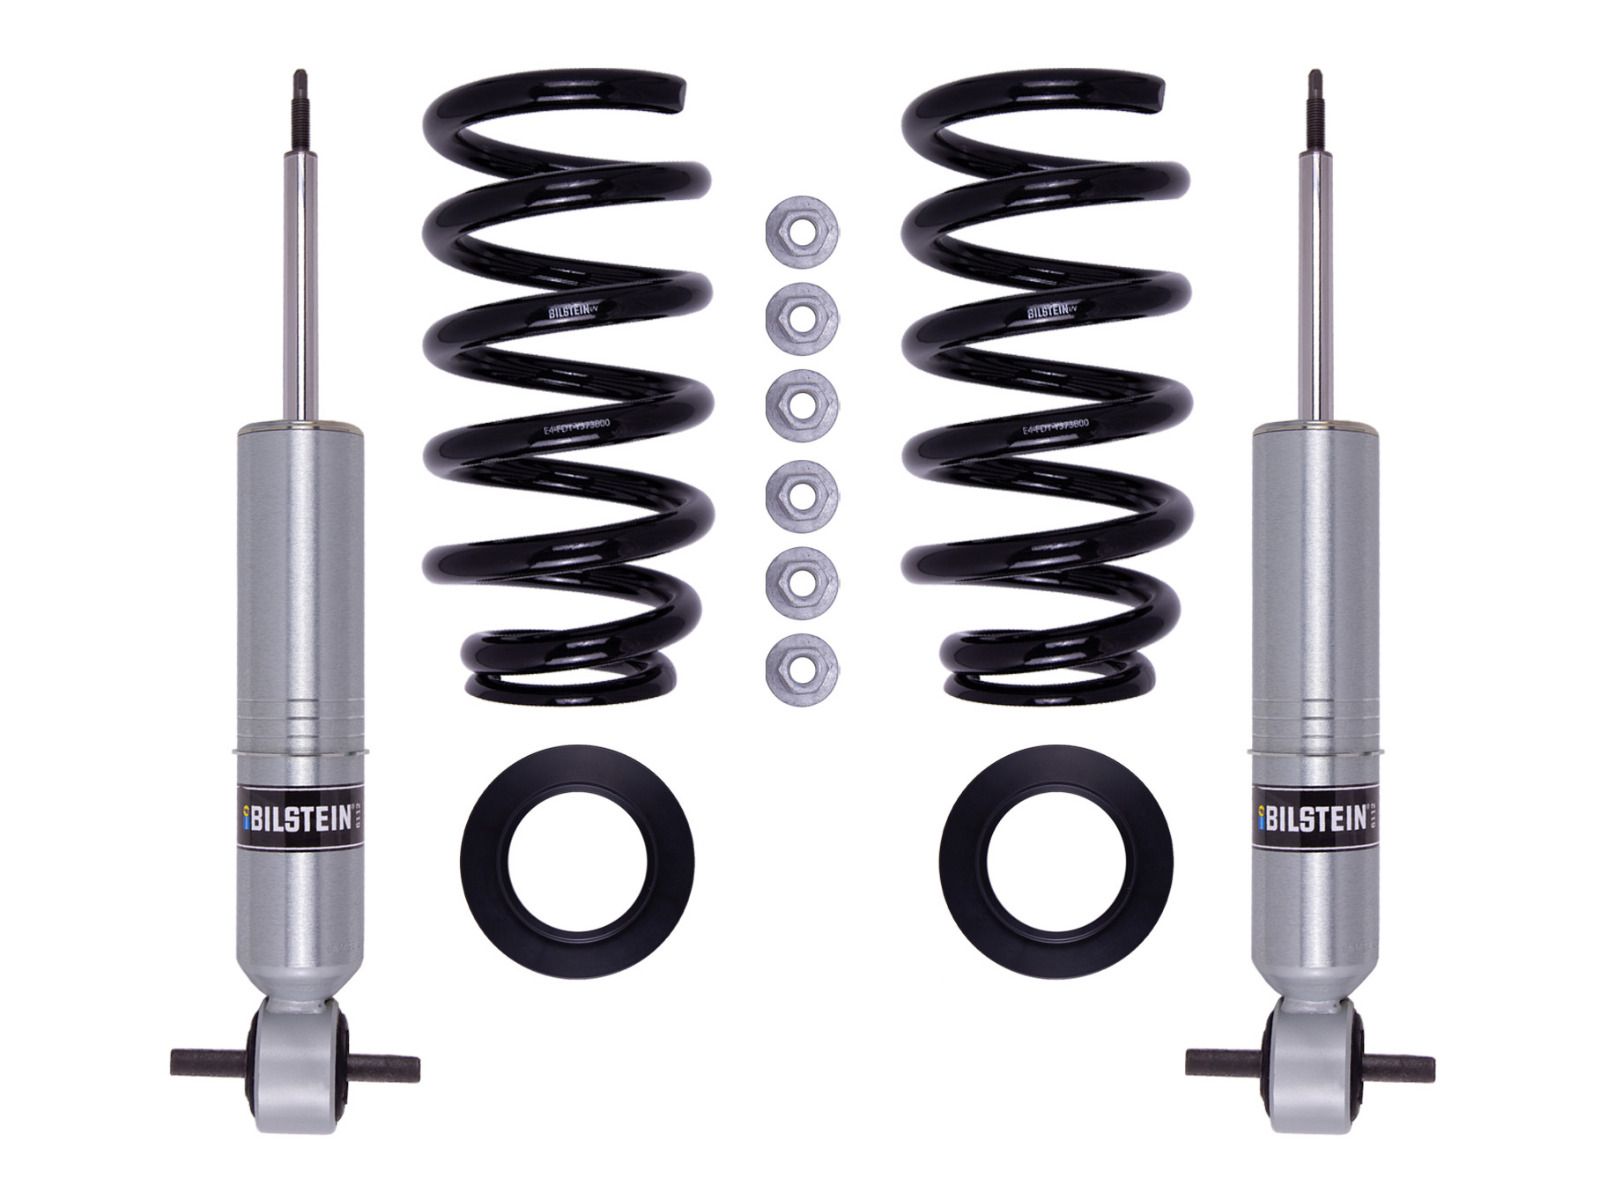 Tahoe 2007-2014 Chevy 4WD - Bilstein FRONT 6112 Series Coil-Over Kit (Adjustable Height 1.1"- 2.75" Front Lift)